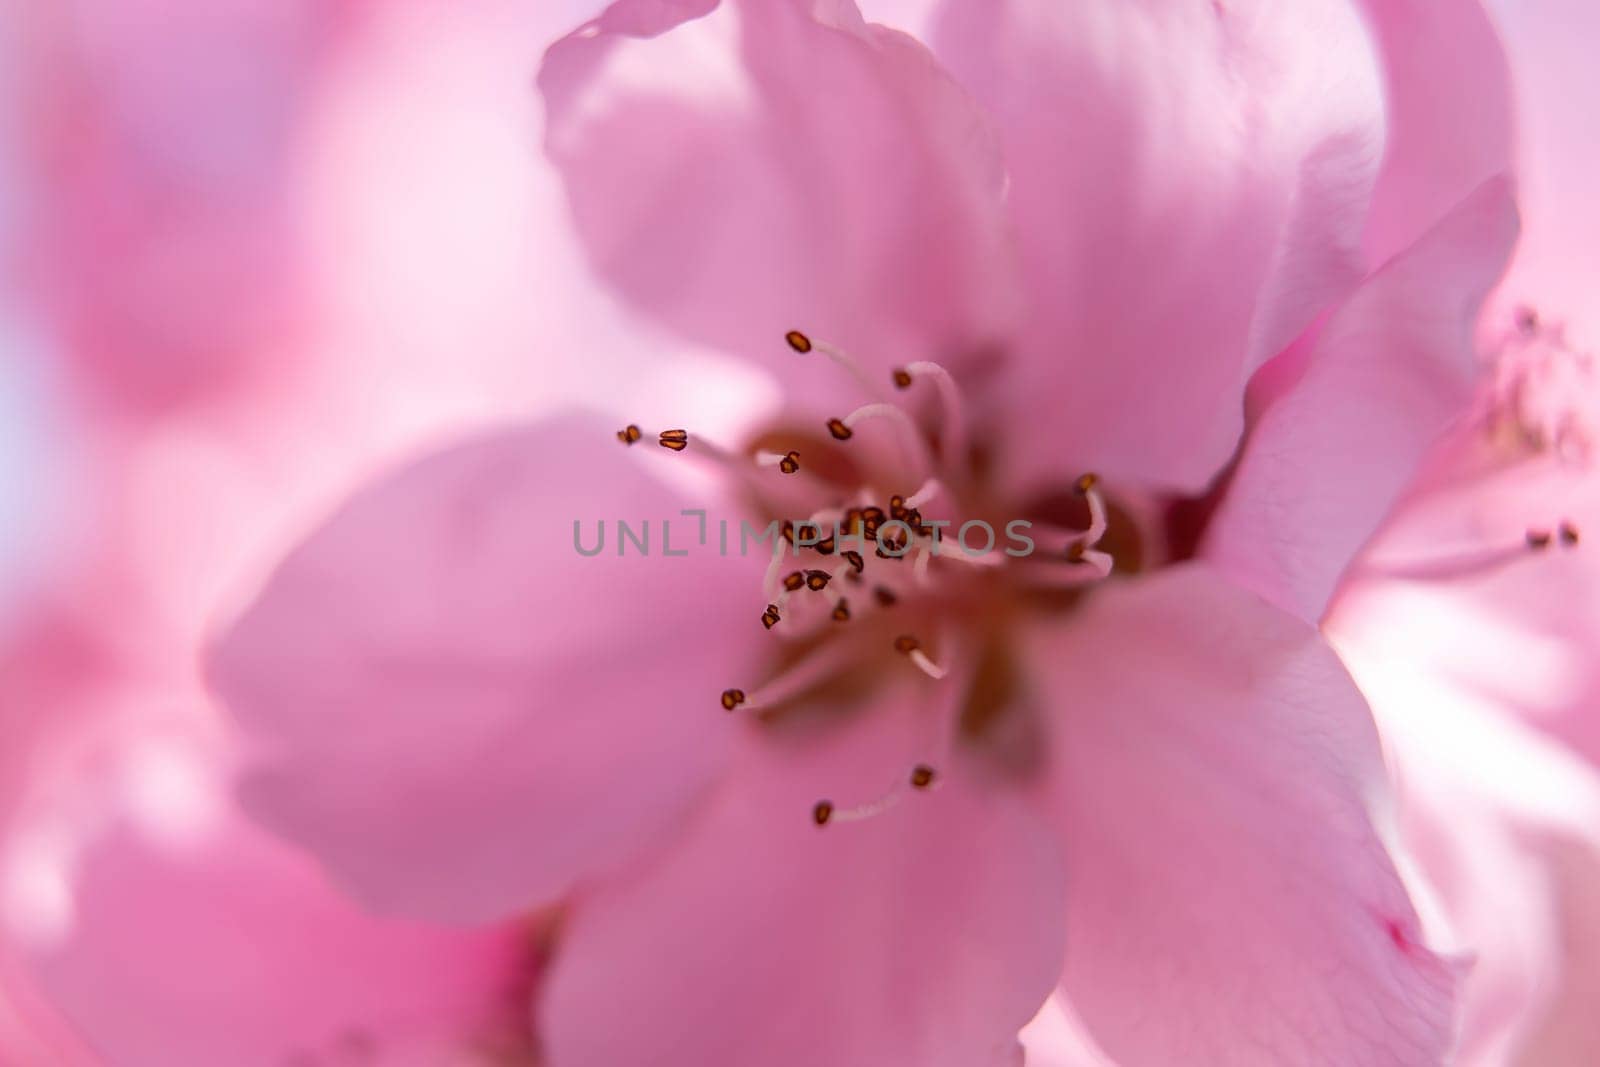 close up pink peach flower with a fuzzy, blurry background. The flower is the main focus of the image, and the background is intentionally blurred to draw attention to the flower